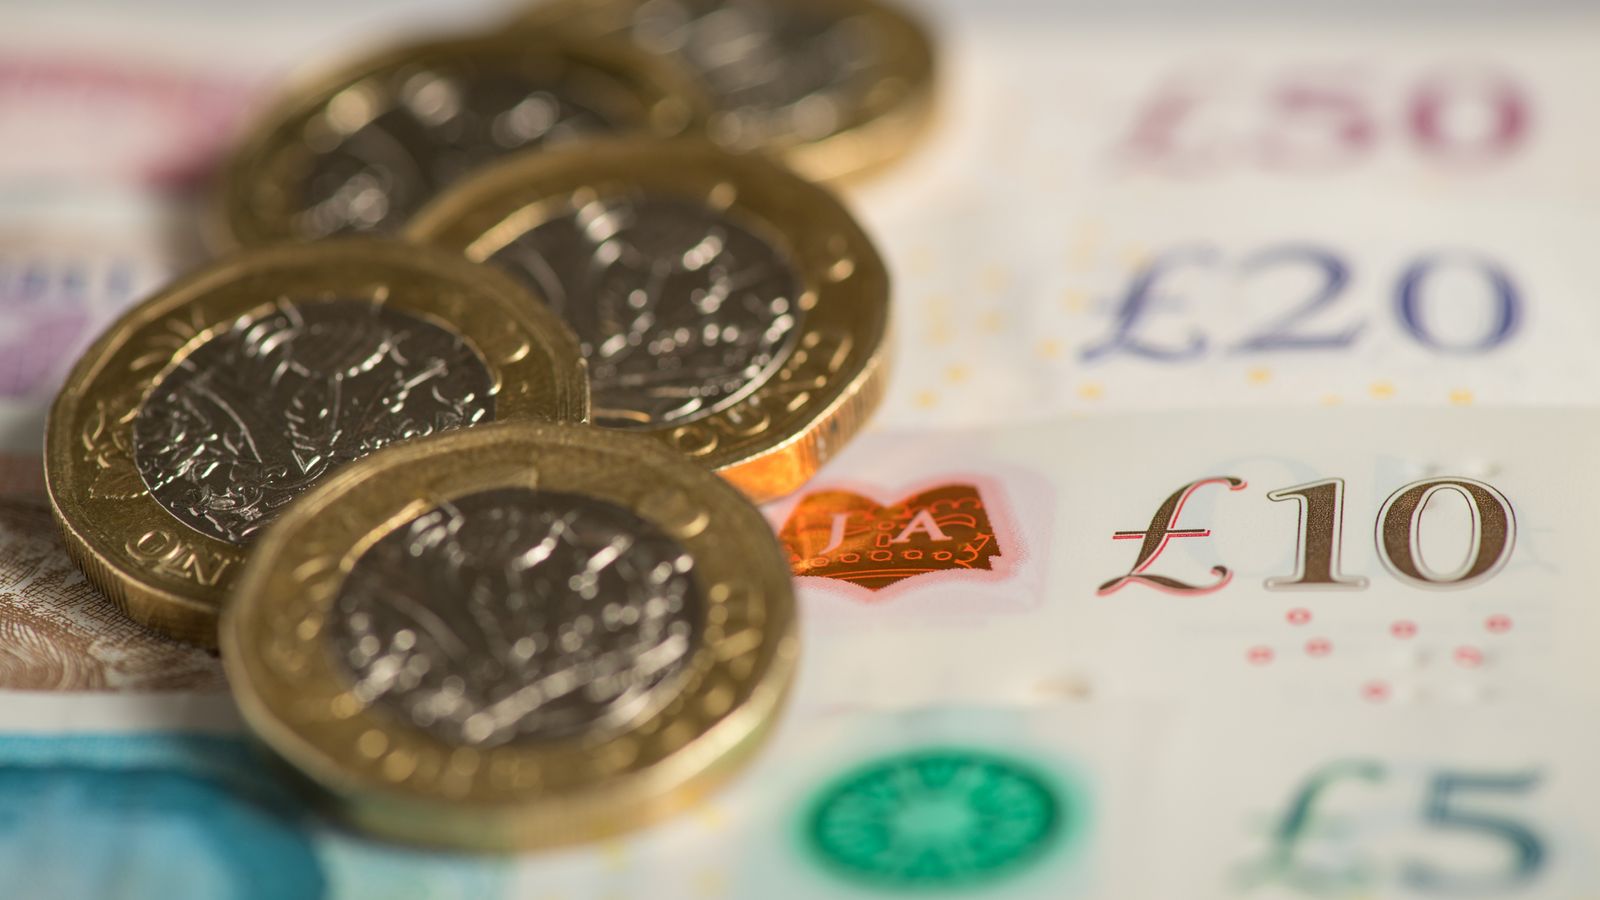 Energy bills, council tax, broadband and everything due to rise in price from 1 April